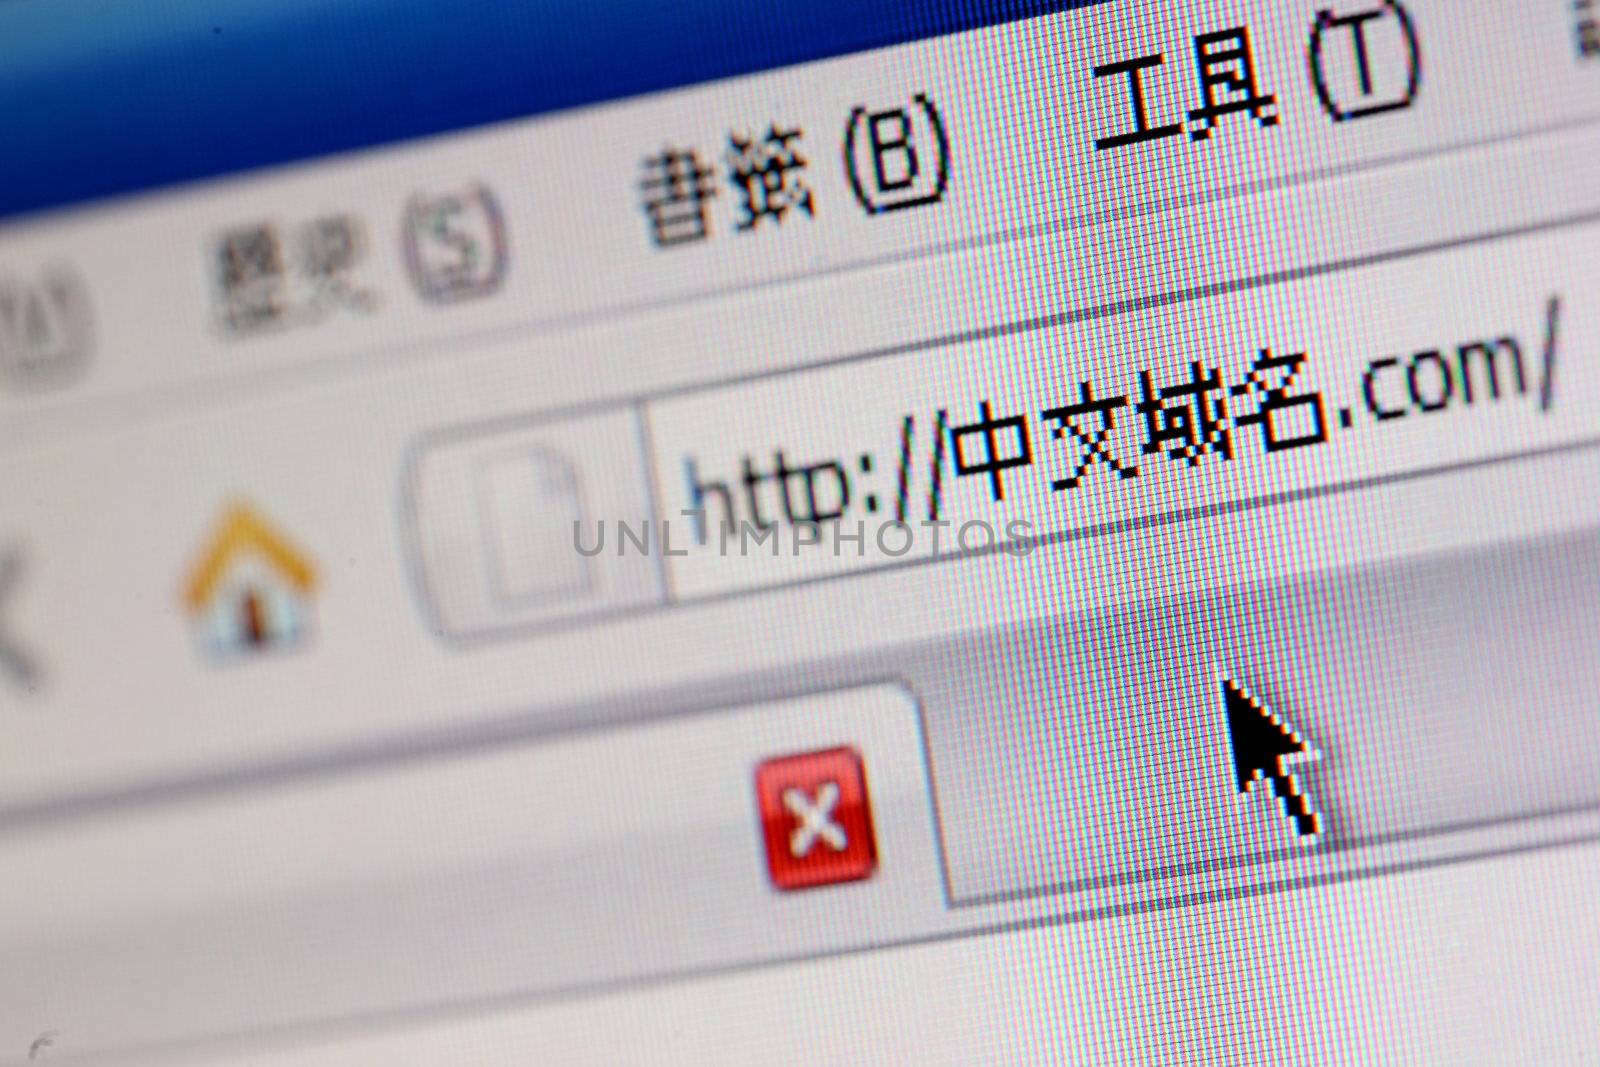 A chinese domain name in browser. "����" means chinese,"��W" means domain name.